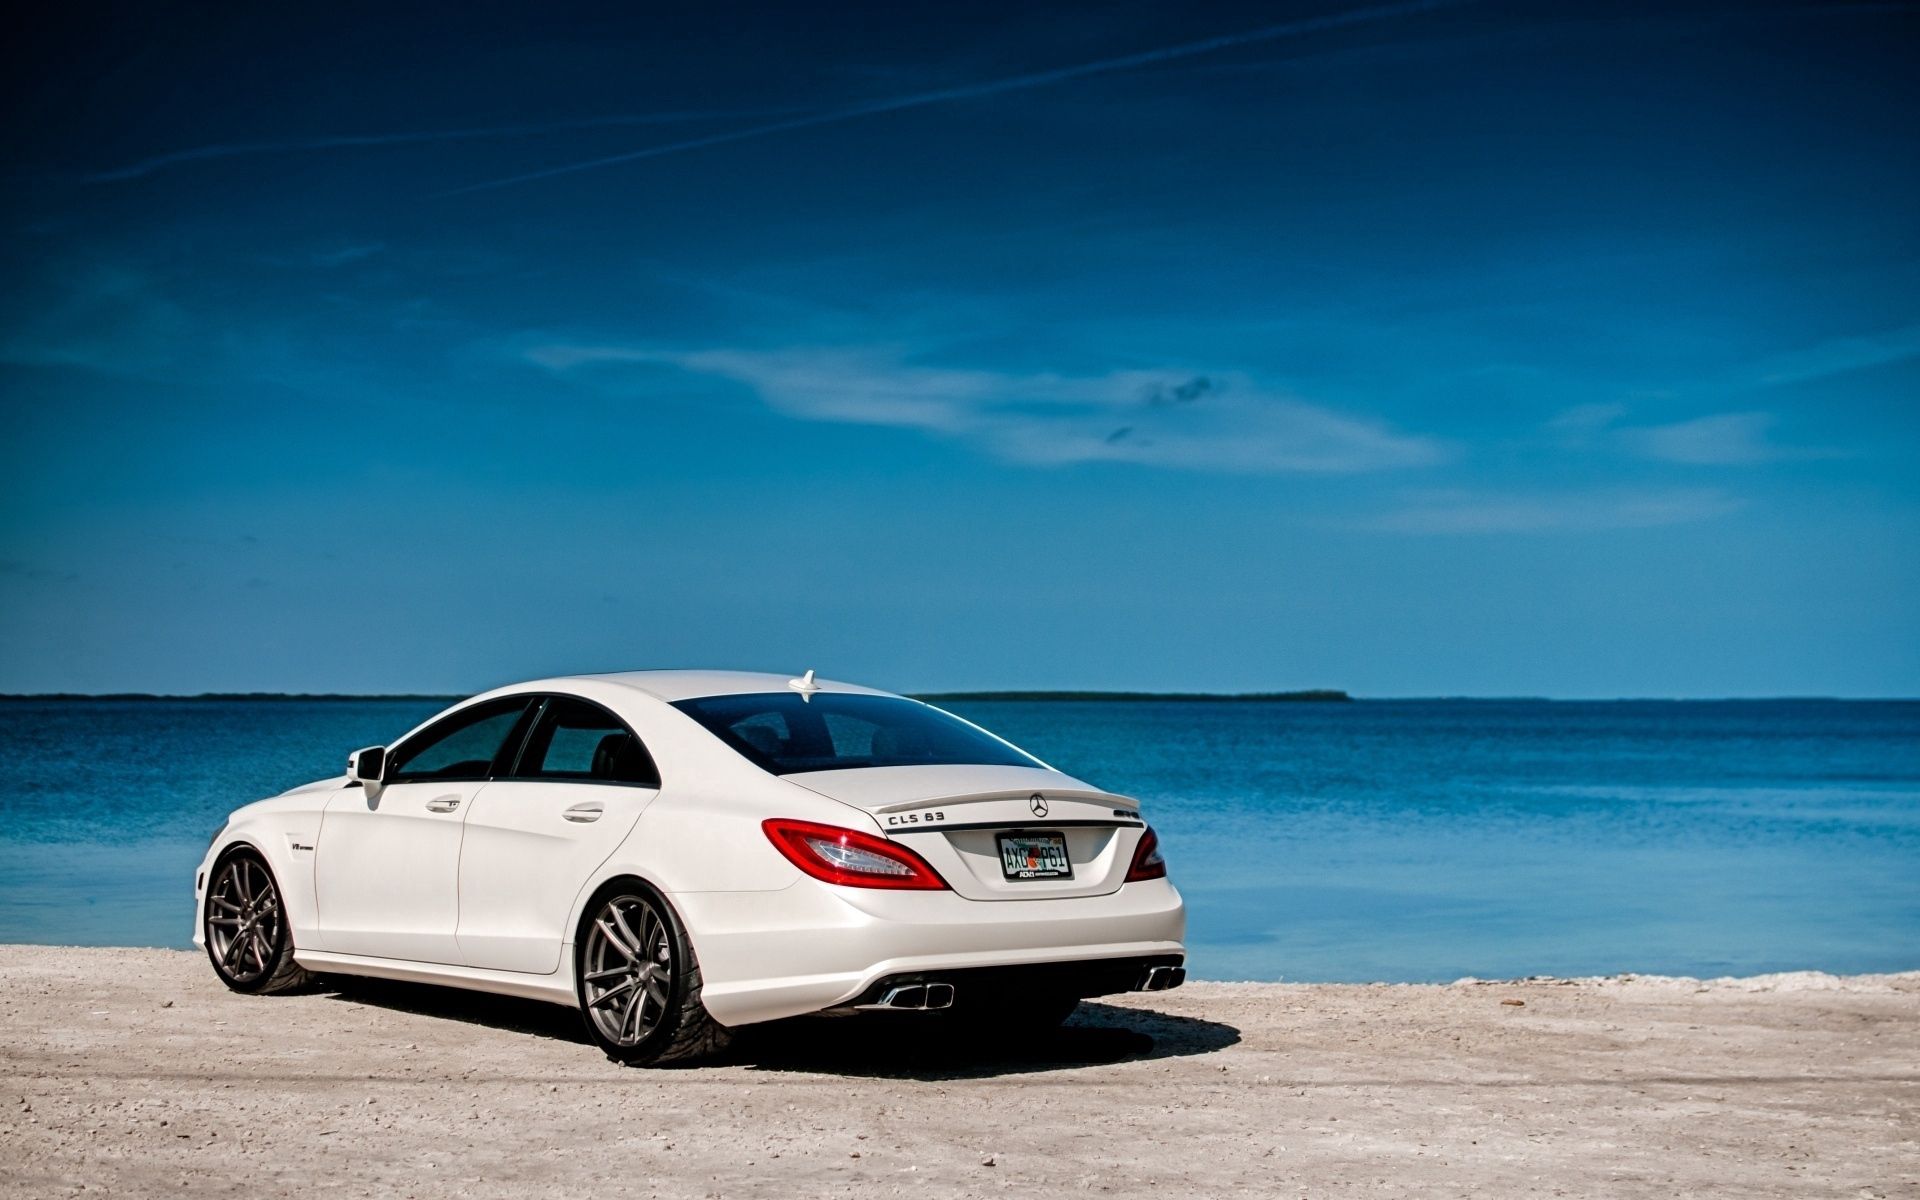 mersedes, cars, white, back view, rear view, amg, mercedes benz, cls63